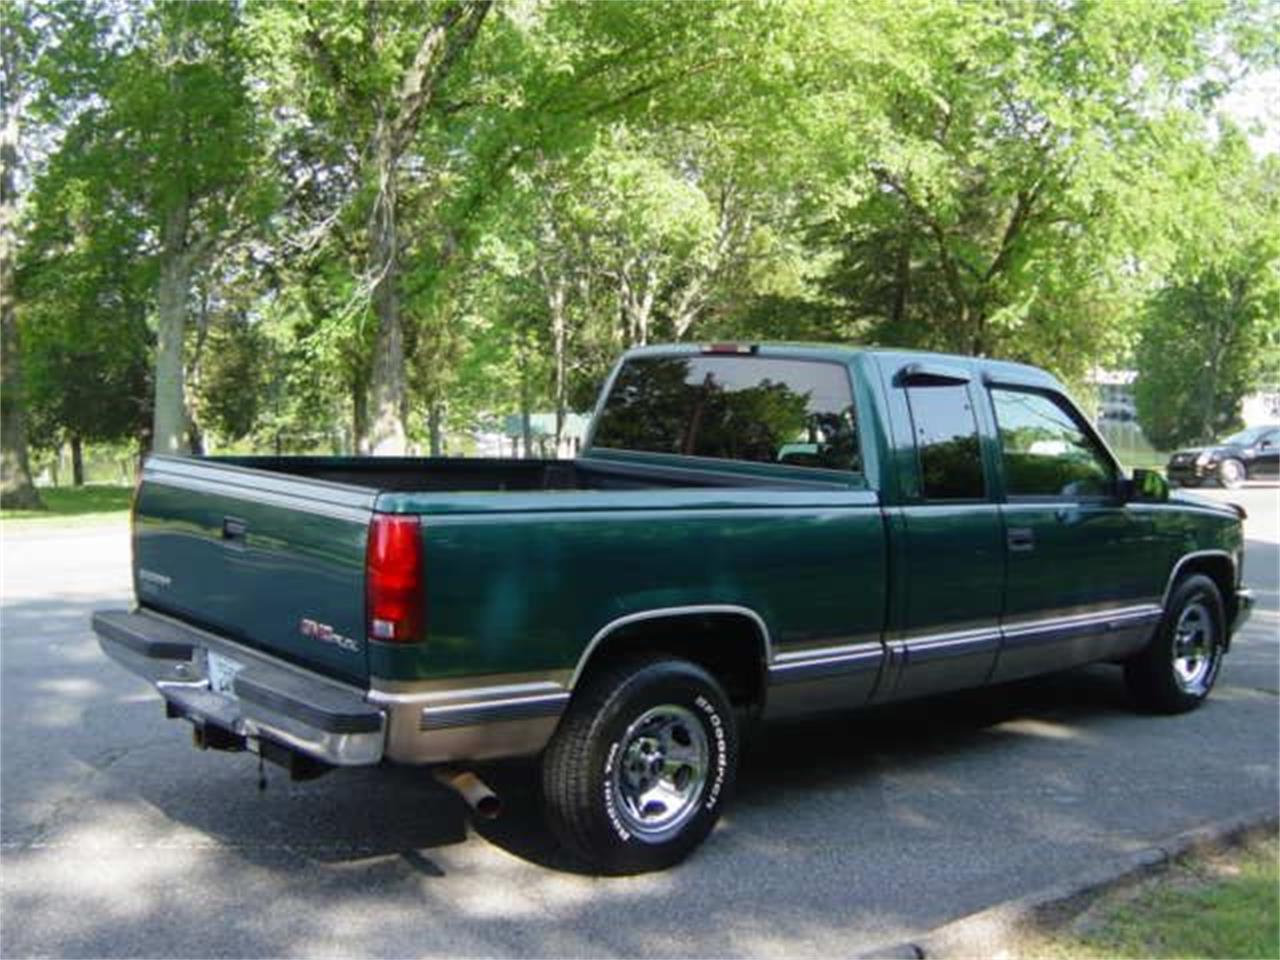 1996 gmc sierra extended cab for sale classiccars com cc 985206 1996 gmc sierra extended cab for sale